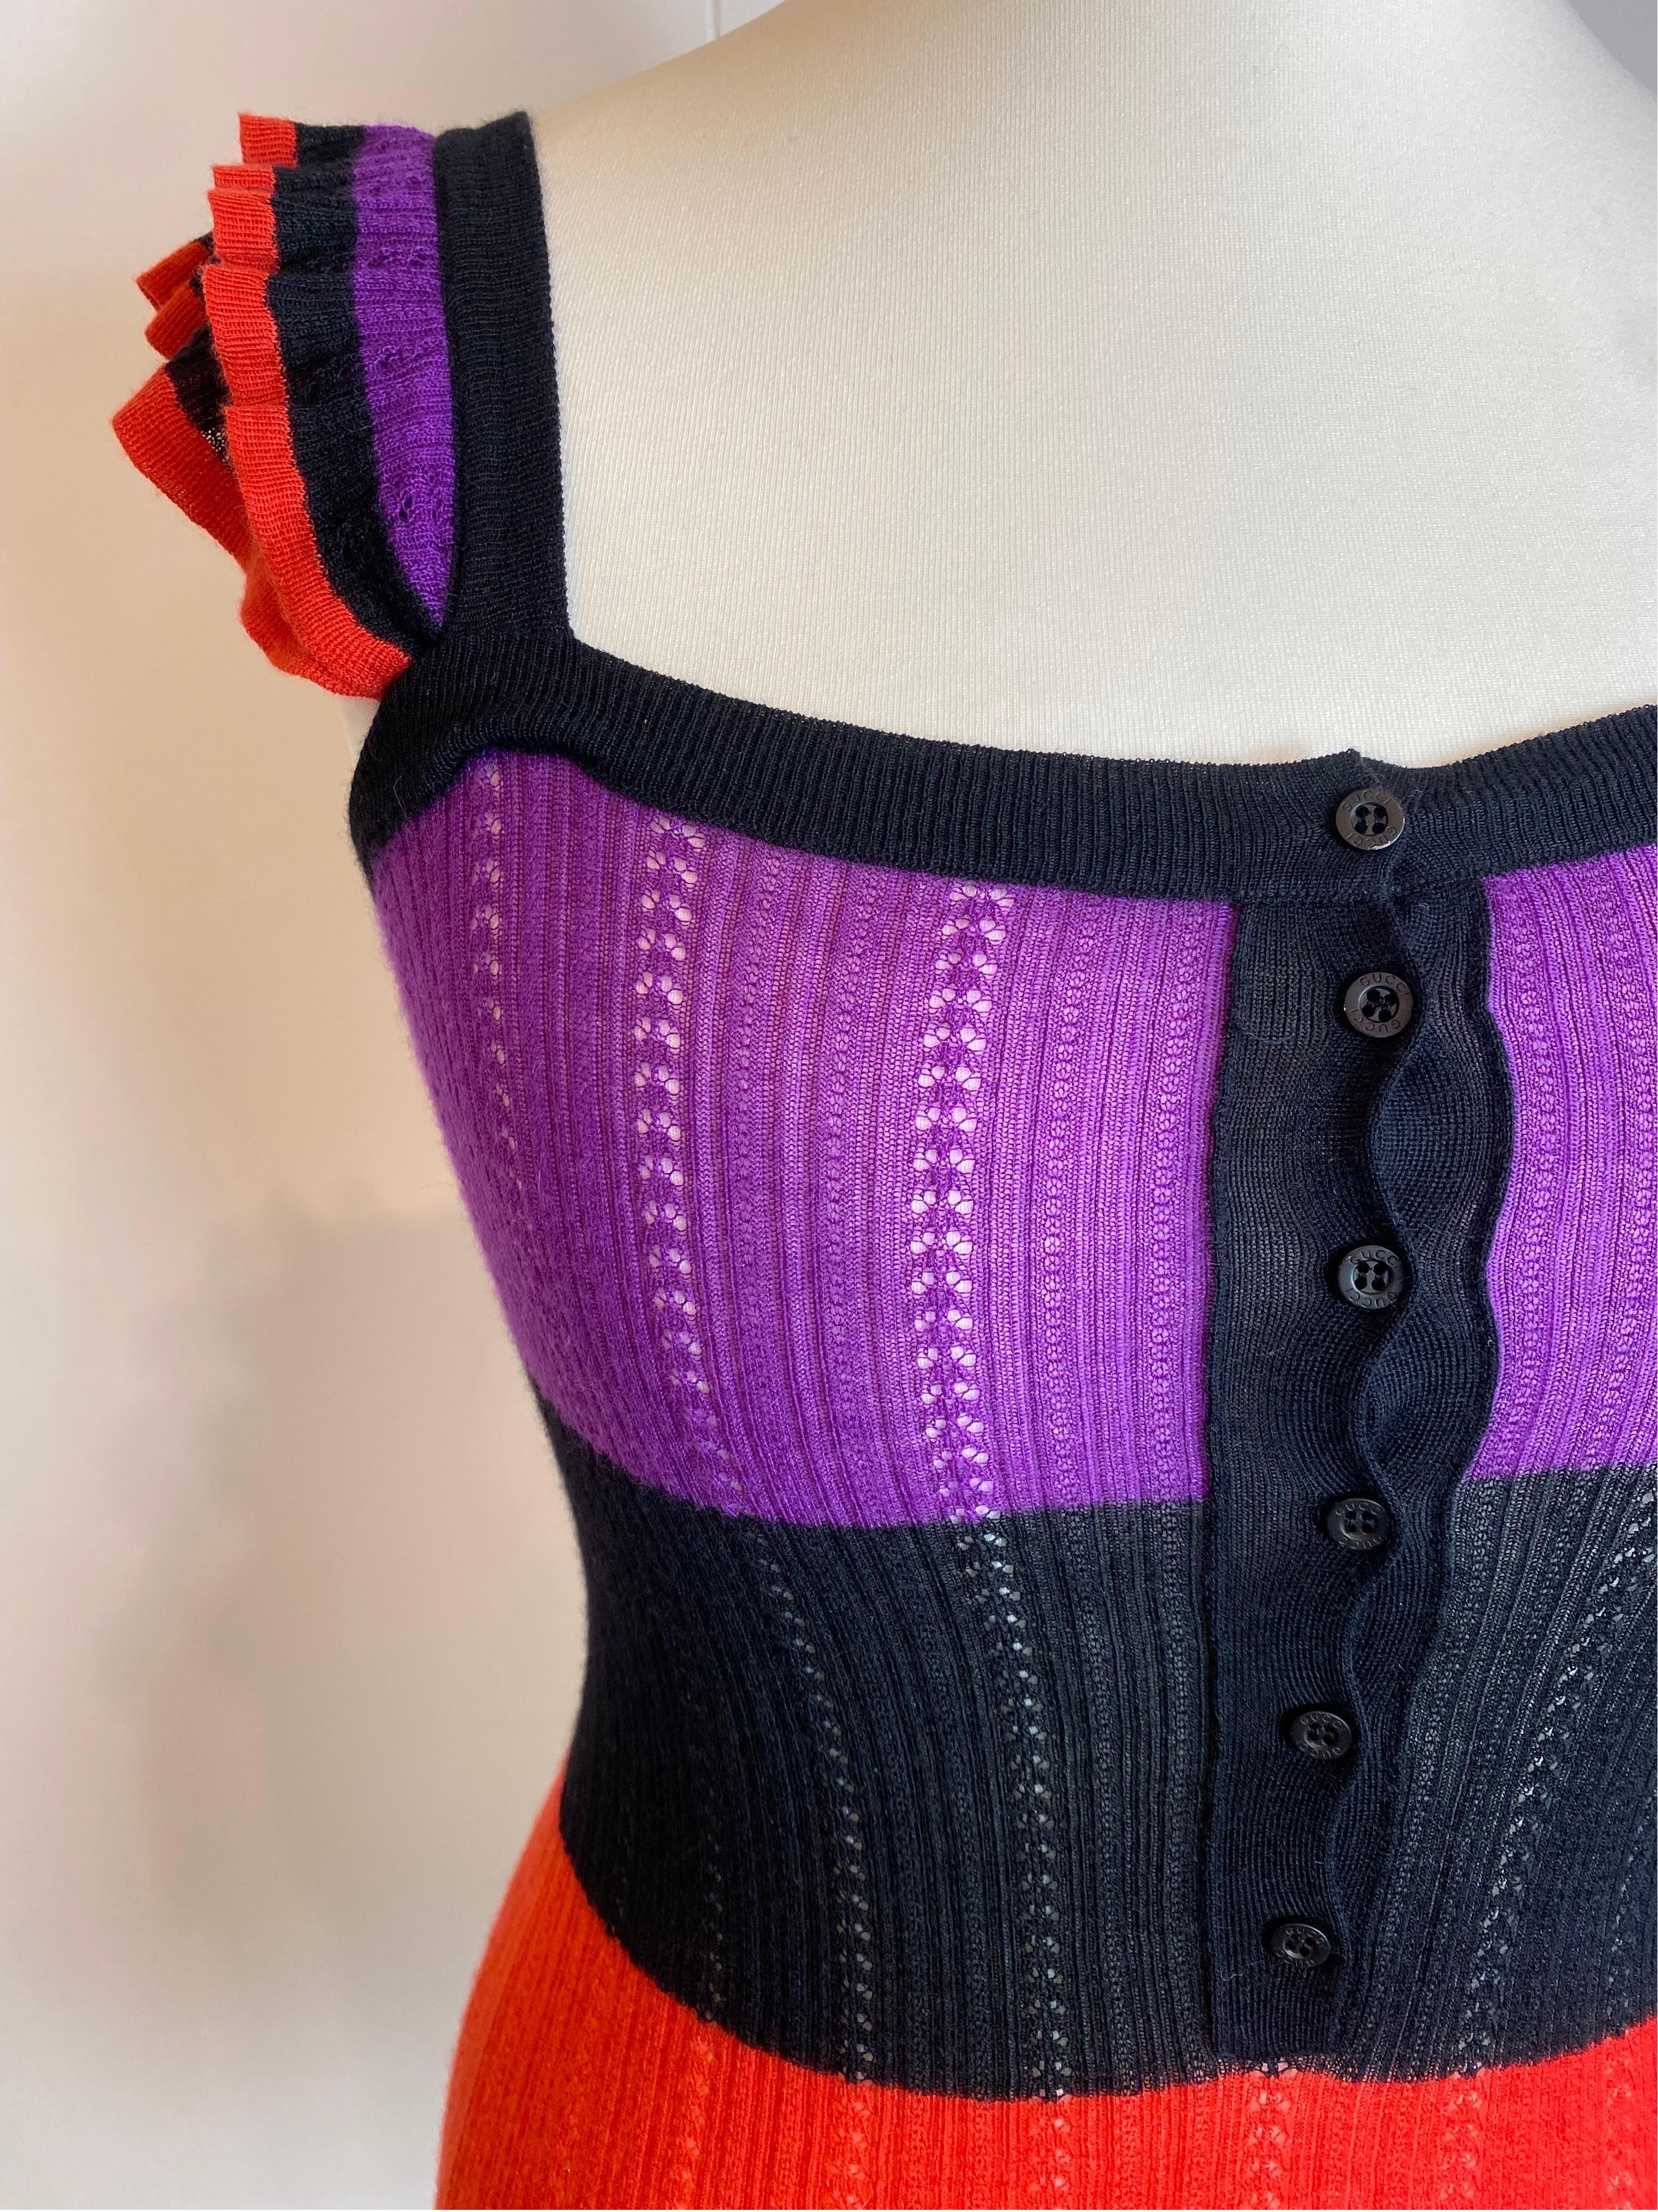 Gucci 2007 SS violet and red stripes top In Excellent Condition For Sale In Carnate, IT